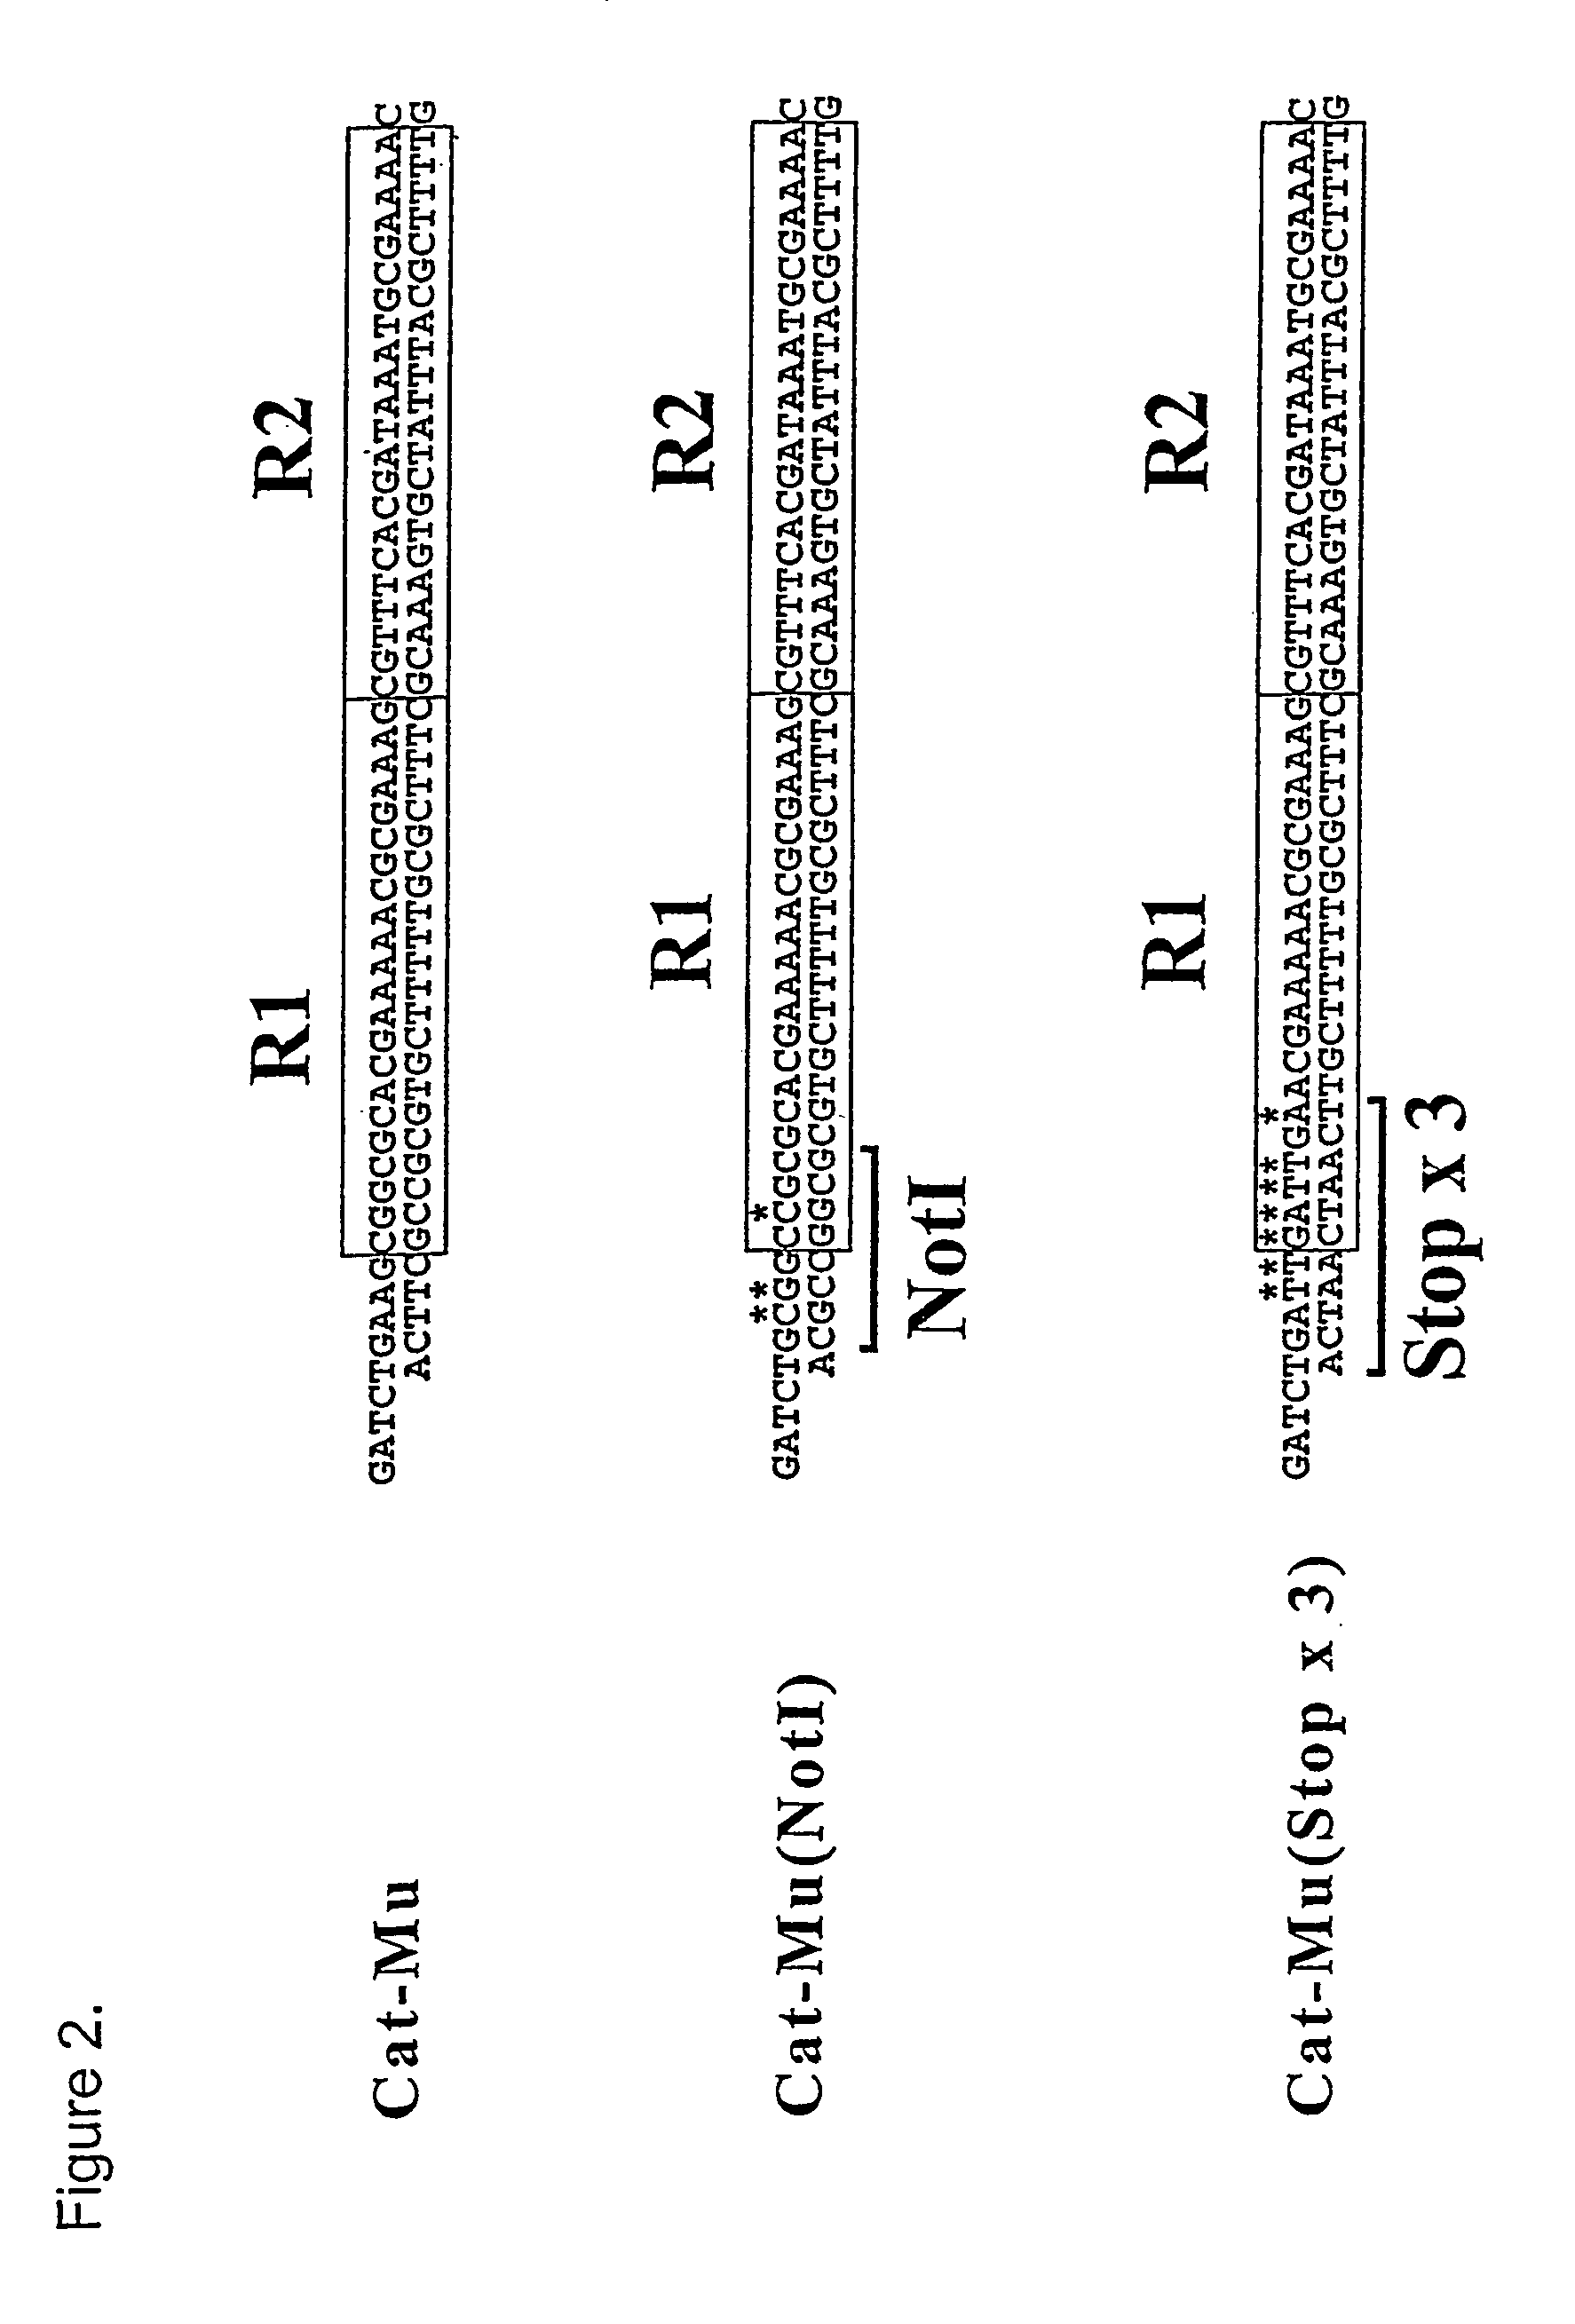 Method and materials for producing deletion derivatives of polypeptides